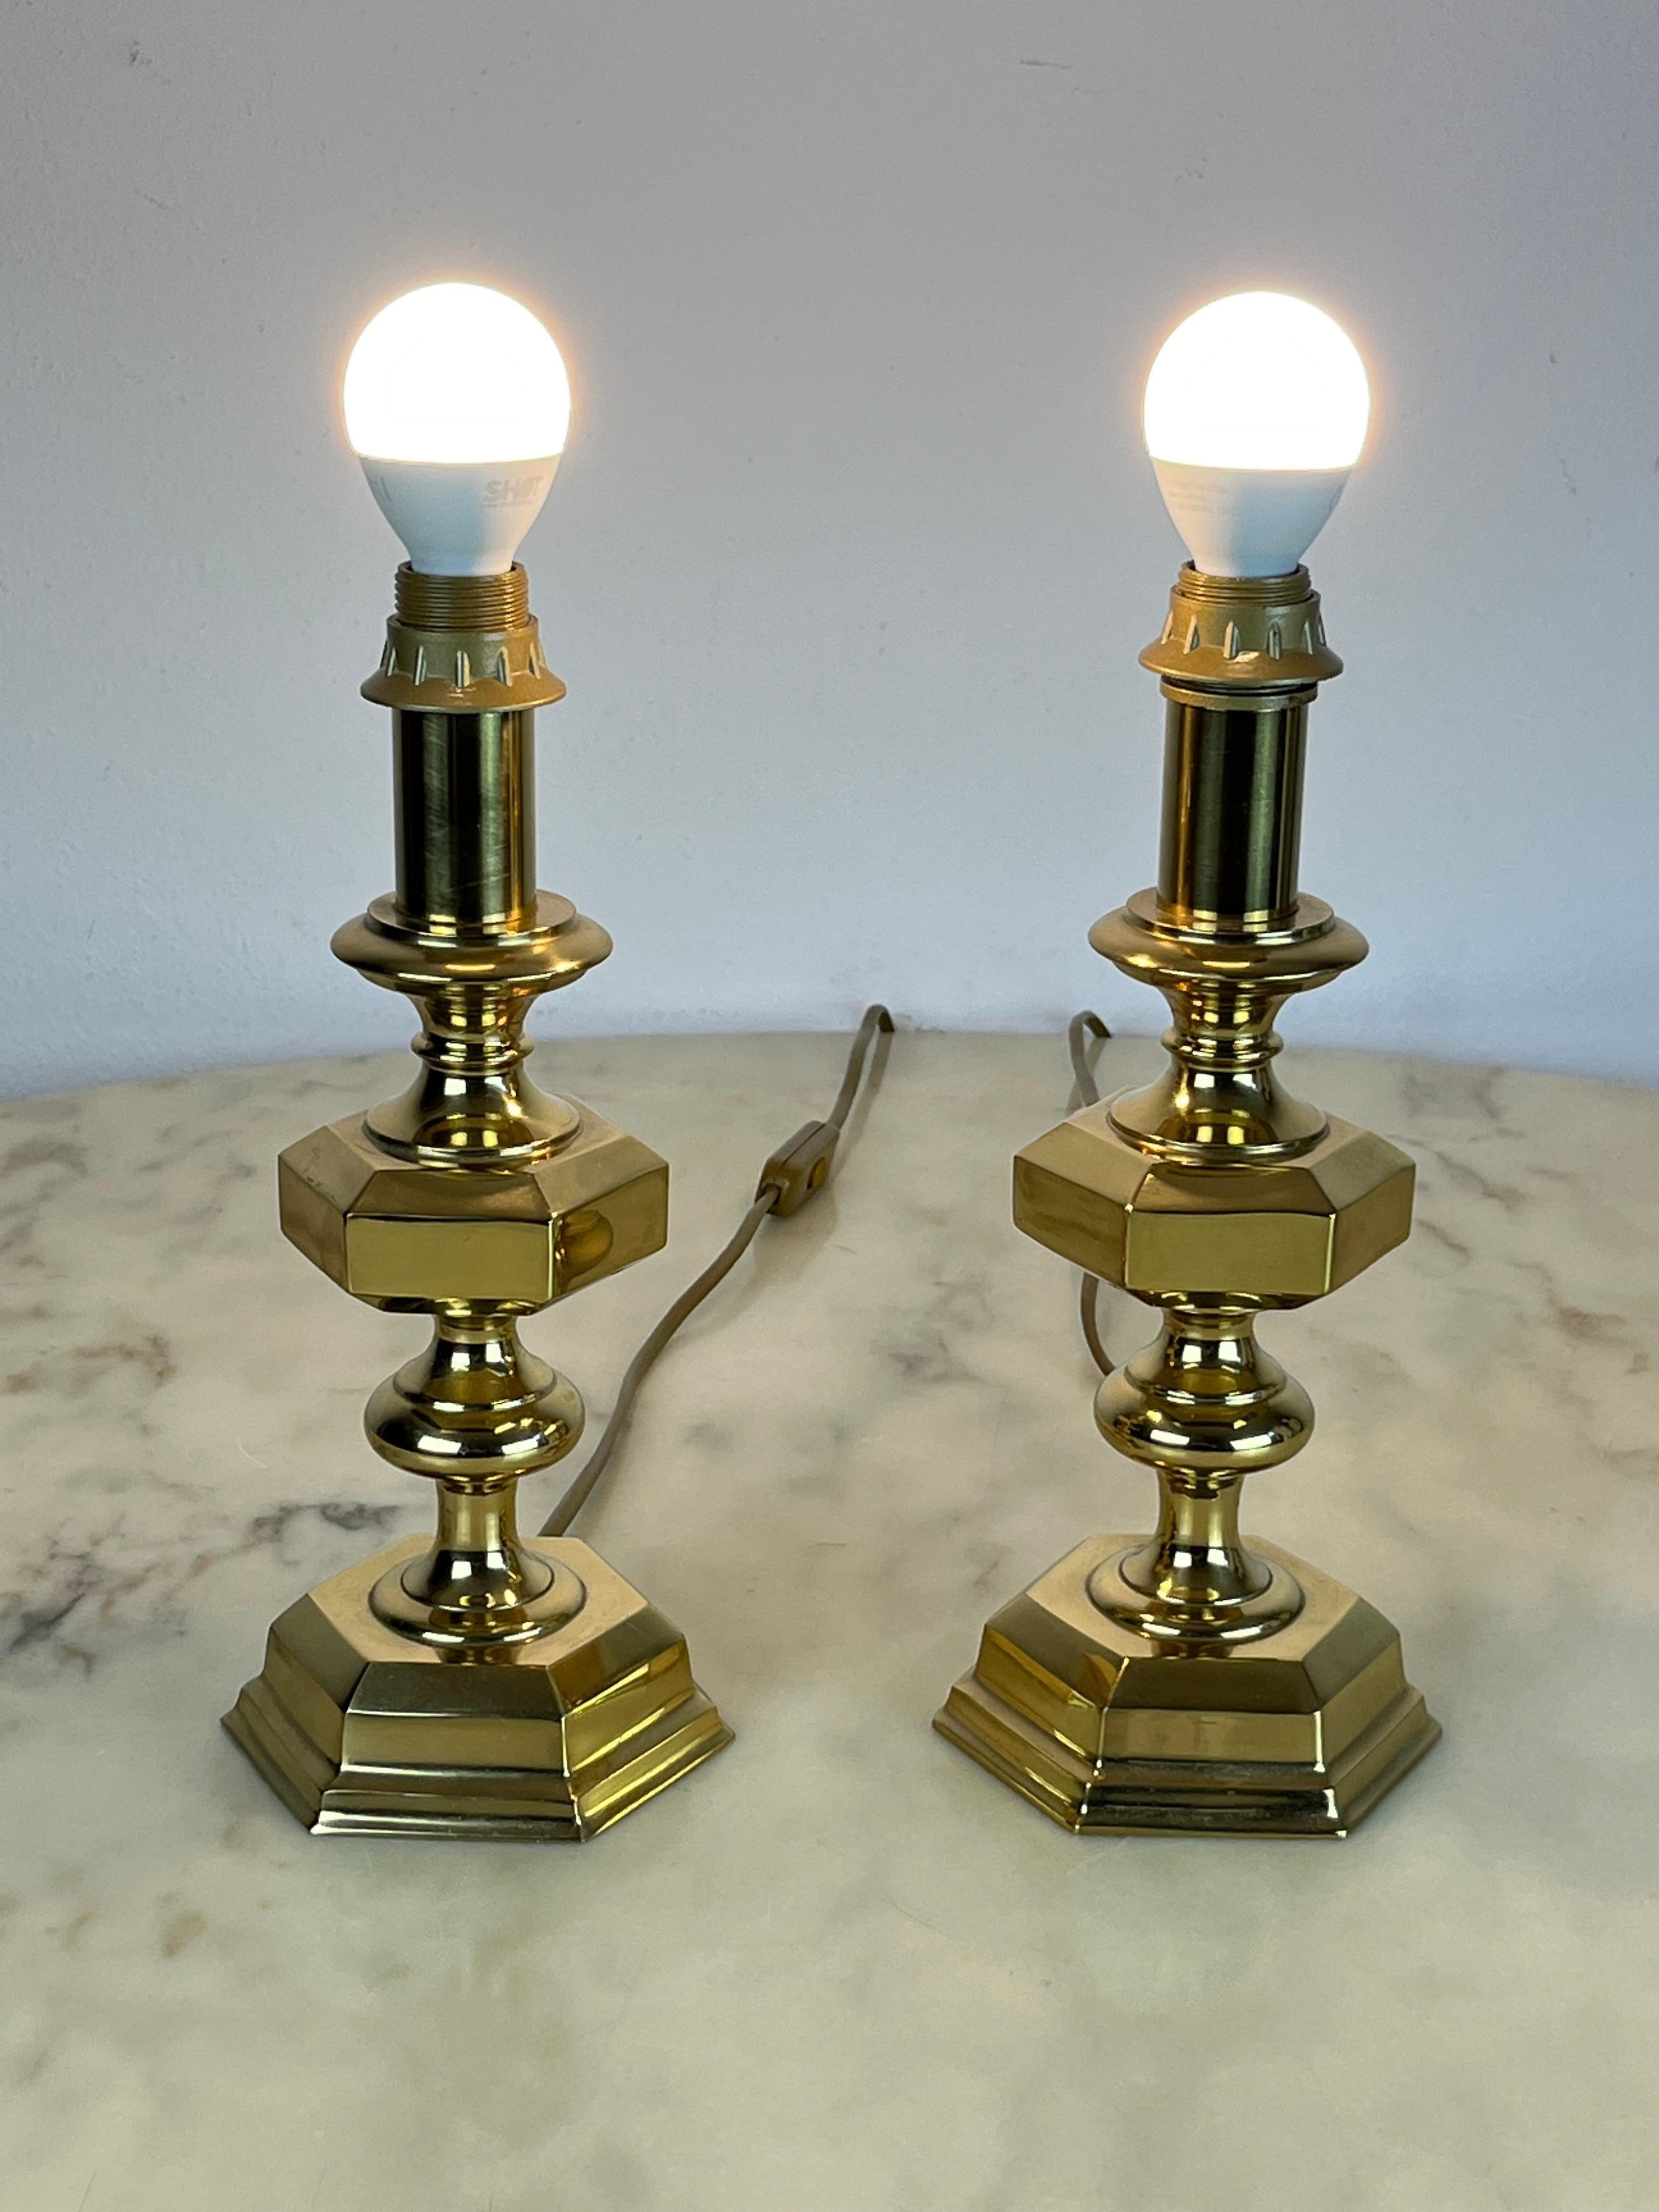 Pair of Italian brass table lamps, 1980s
Found in a noble apartment, they are intact and functioning. They can be used in a bedroom, to be placed on bedside tables. They measure 27.5 cm in height and base with a diameter of 10 cm, lamps e14.